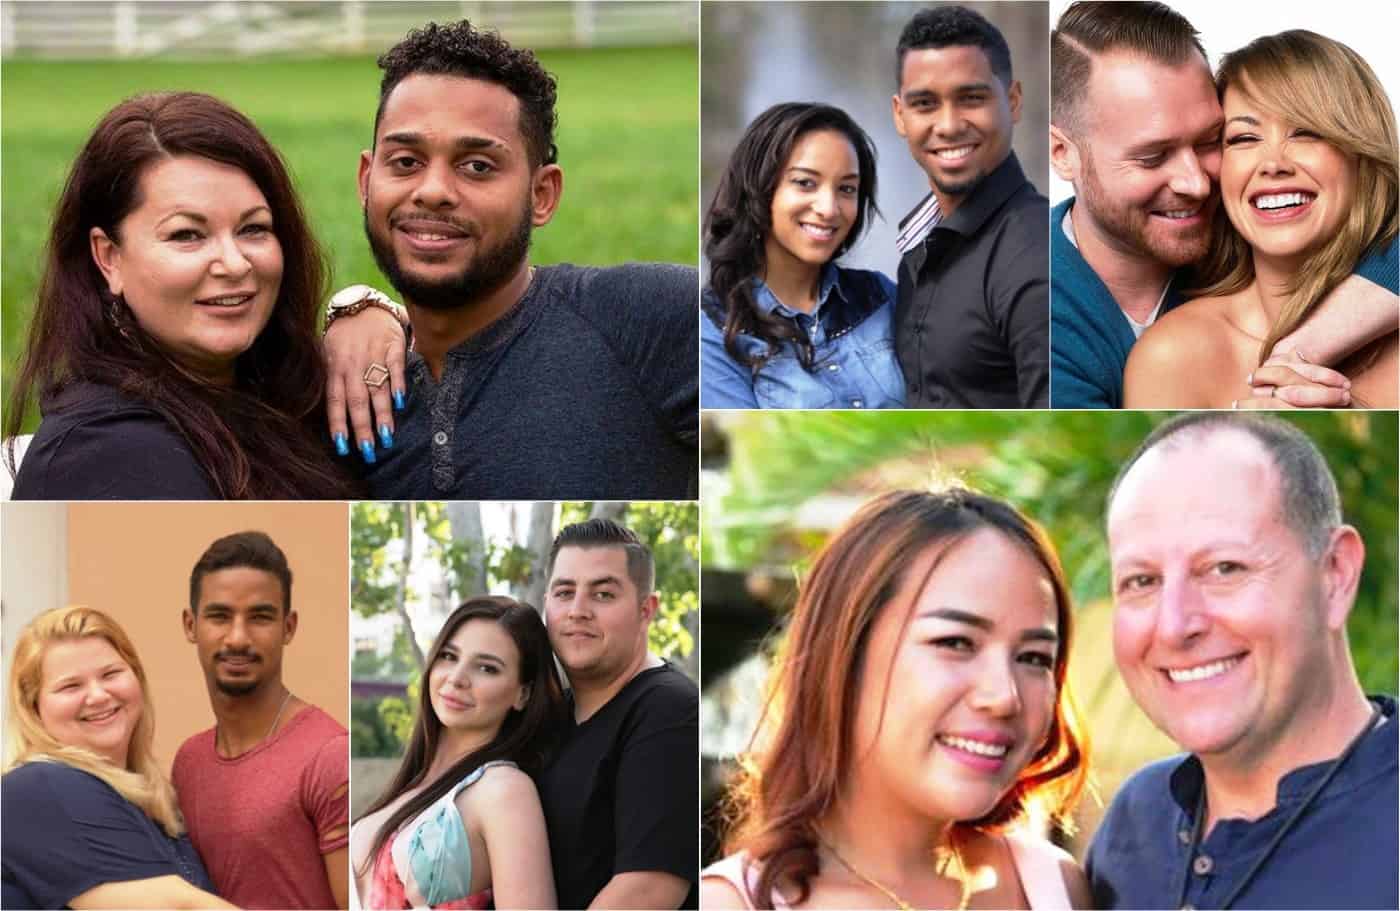 90 day fiance before the 90 days season 2 episode 11